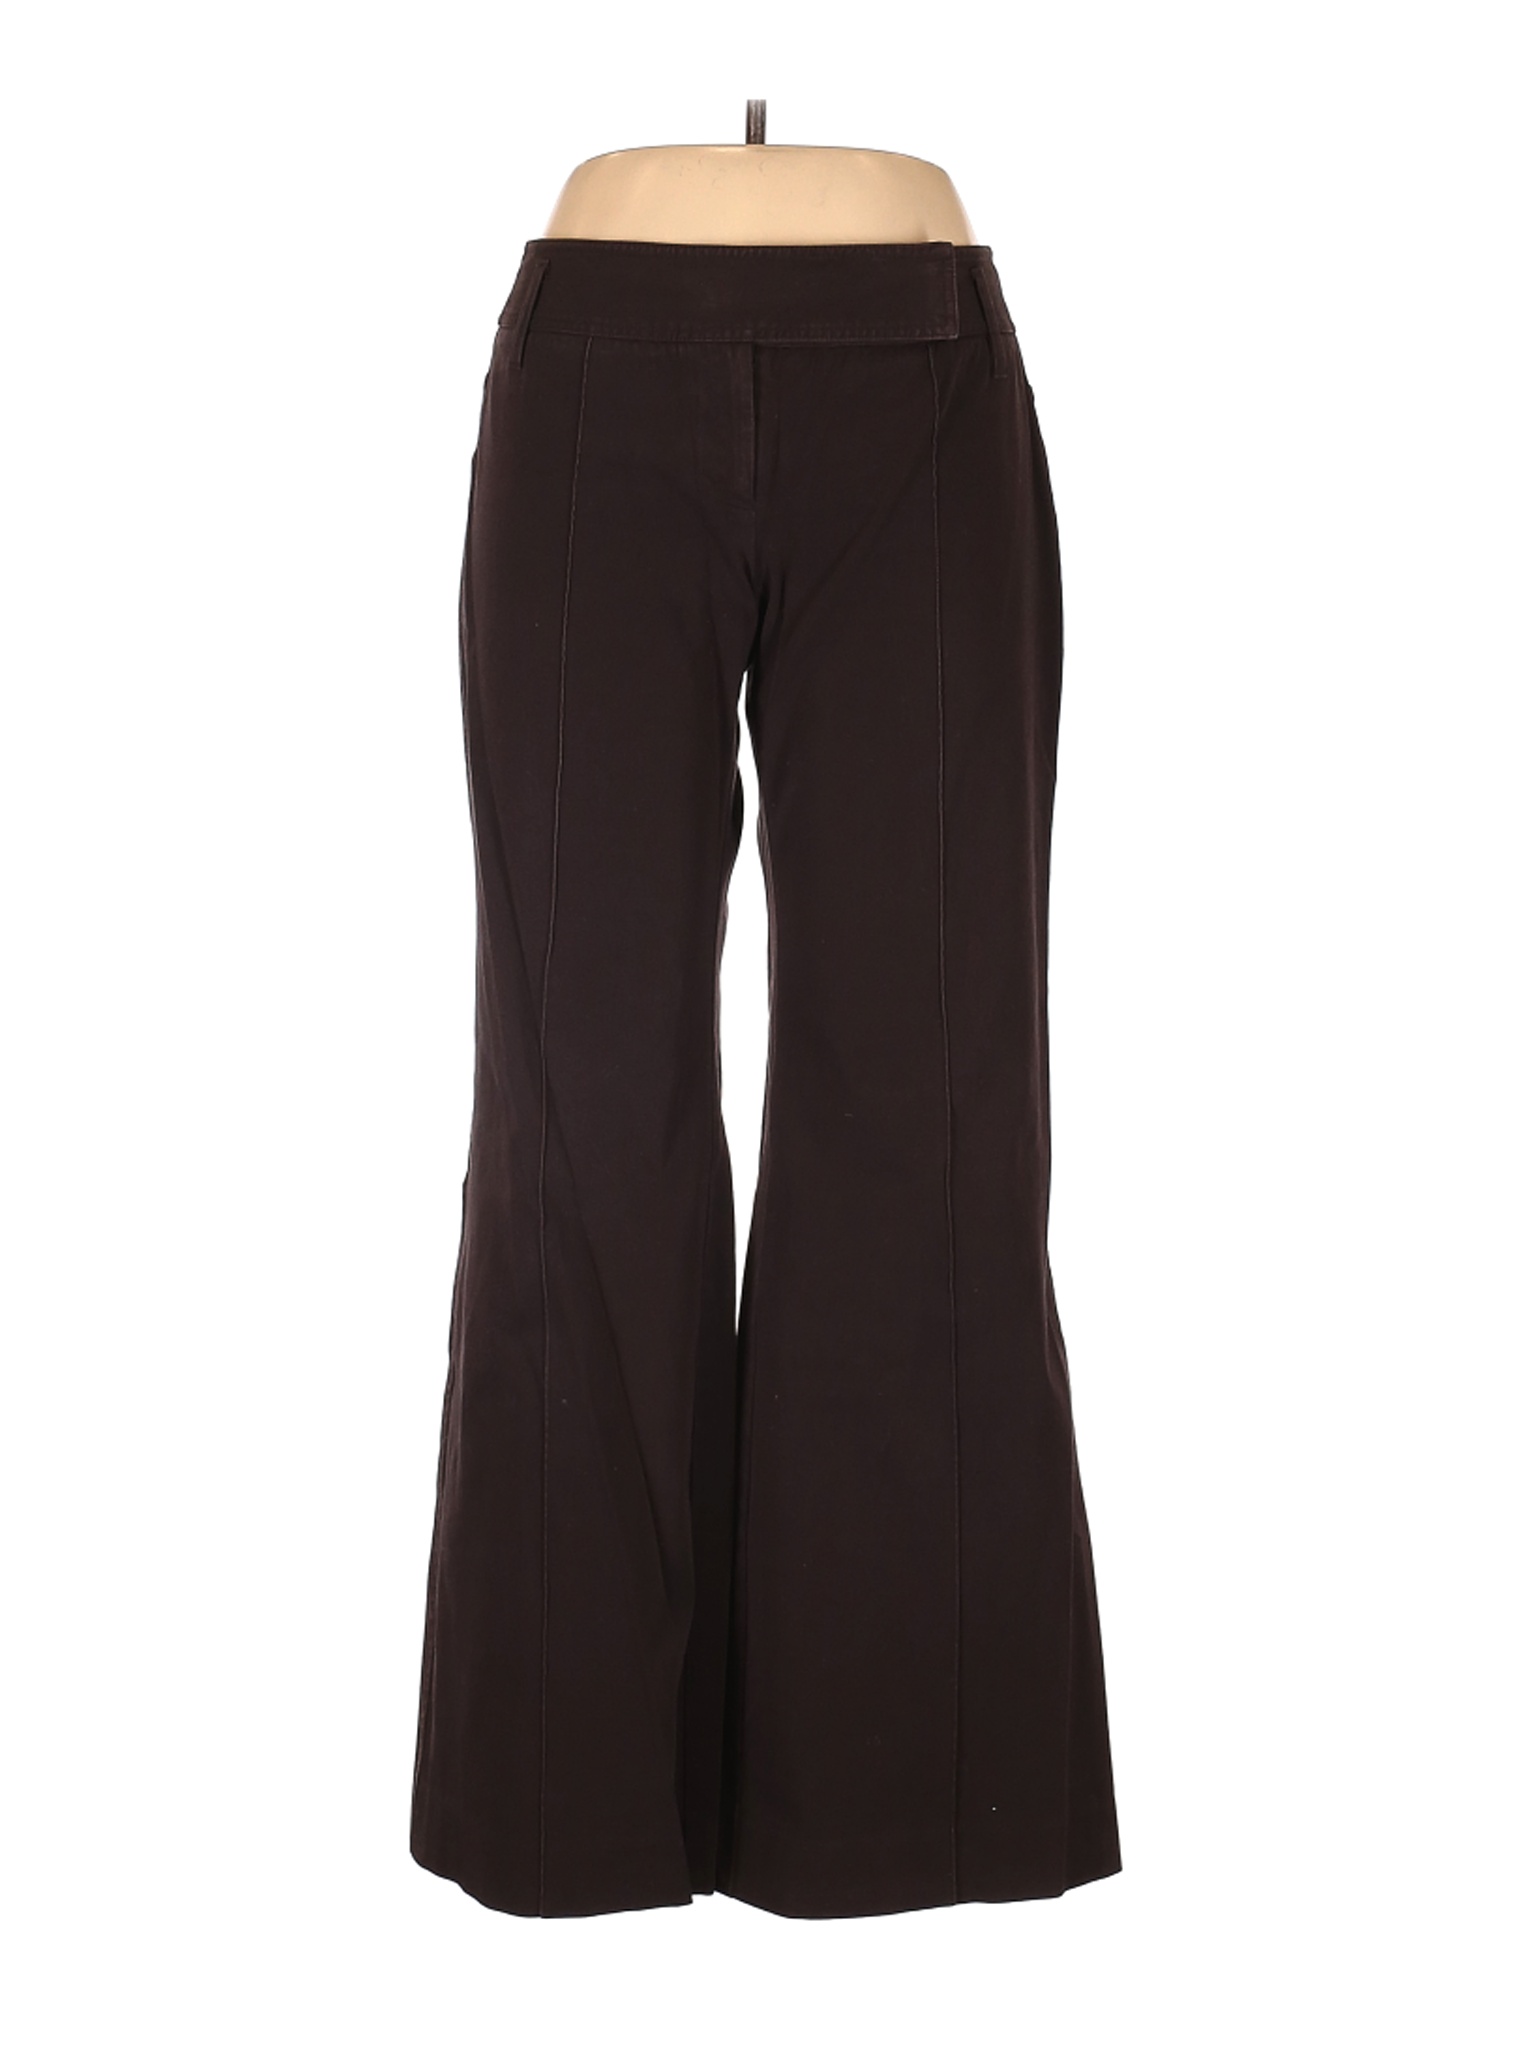 The Limited Women Brown Casual Pants 10 | eBay